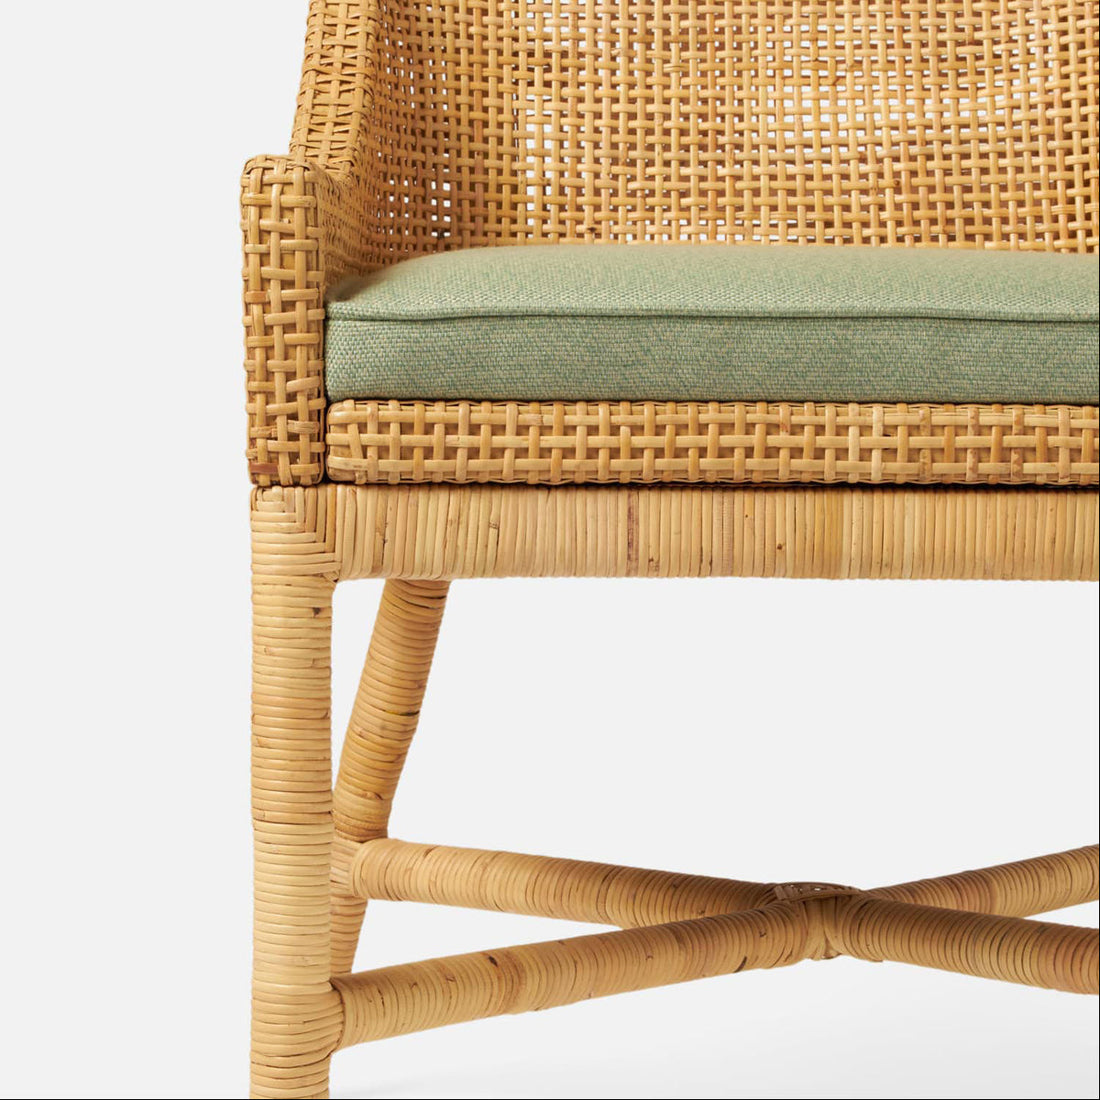 Made Goods Isla Woven Rattan Dining Chair in Kern Fabric